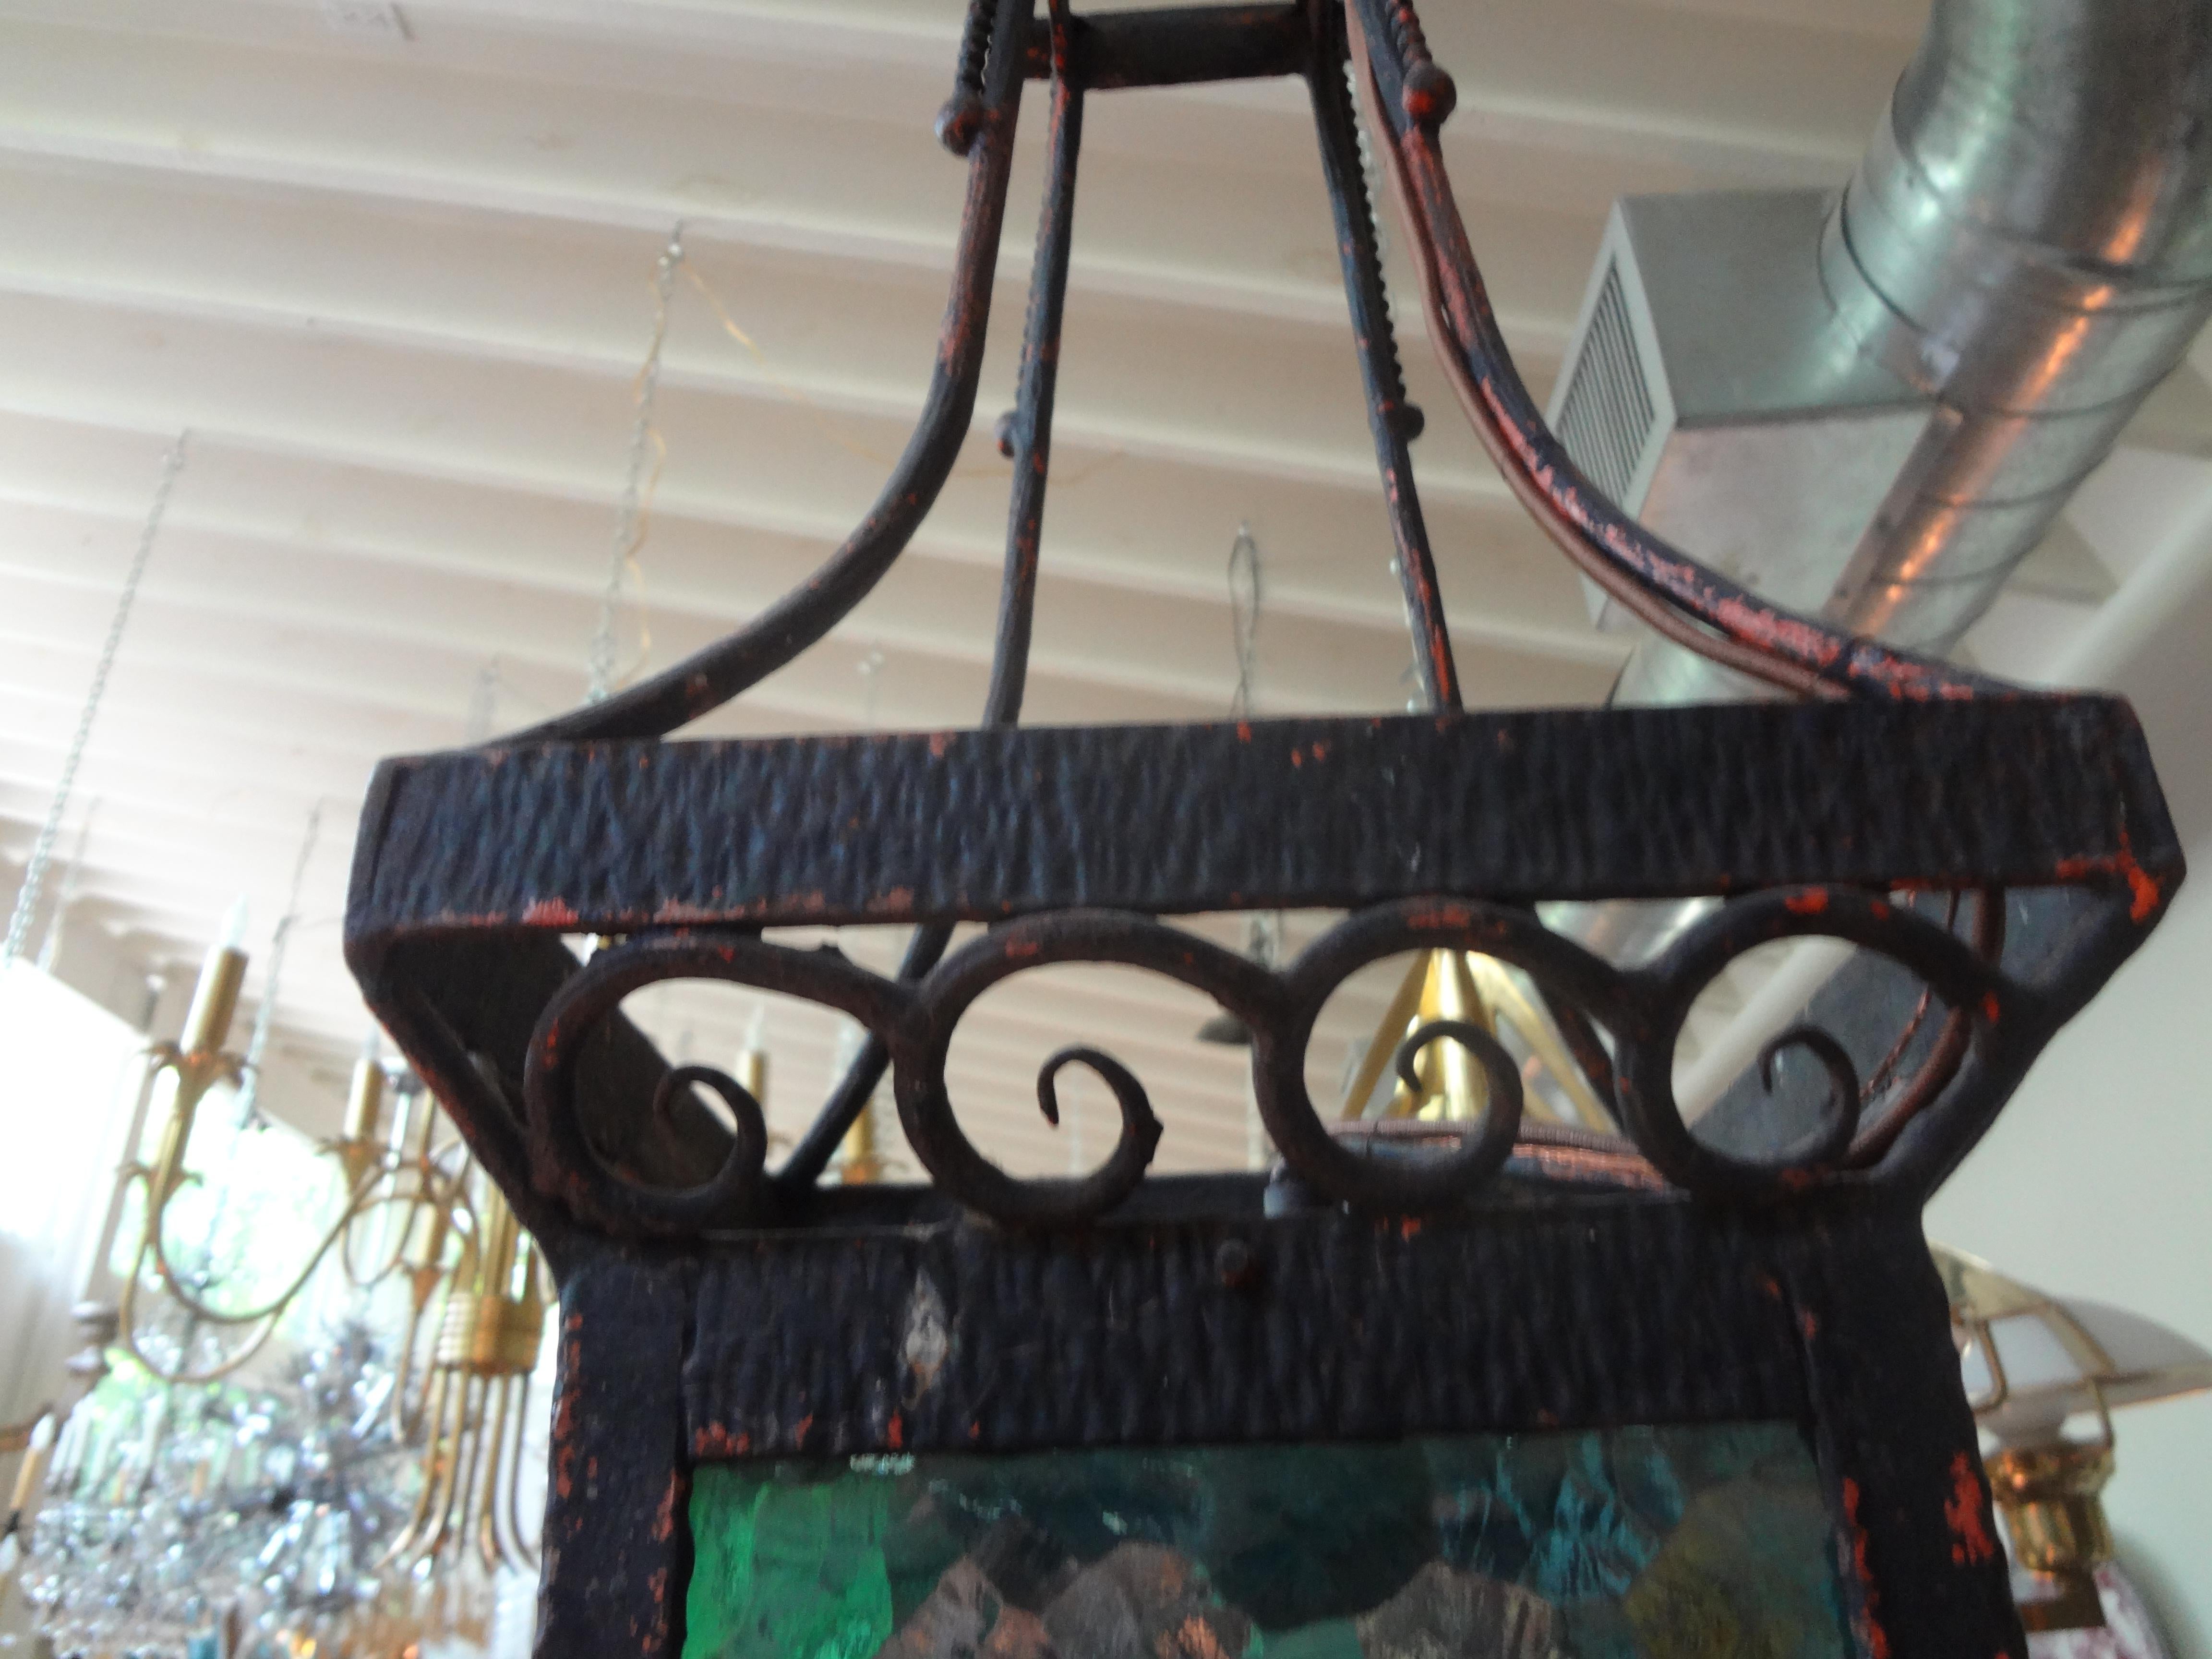 French Art Deco wrought iron lantern.
Great period French Art Deco hand forged wrought iron lantern. This beautiful French lantern has subtle deco accents with lovely multicolored glass panels. The glass panels could easily be changed out to clear